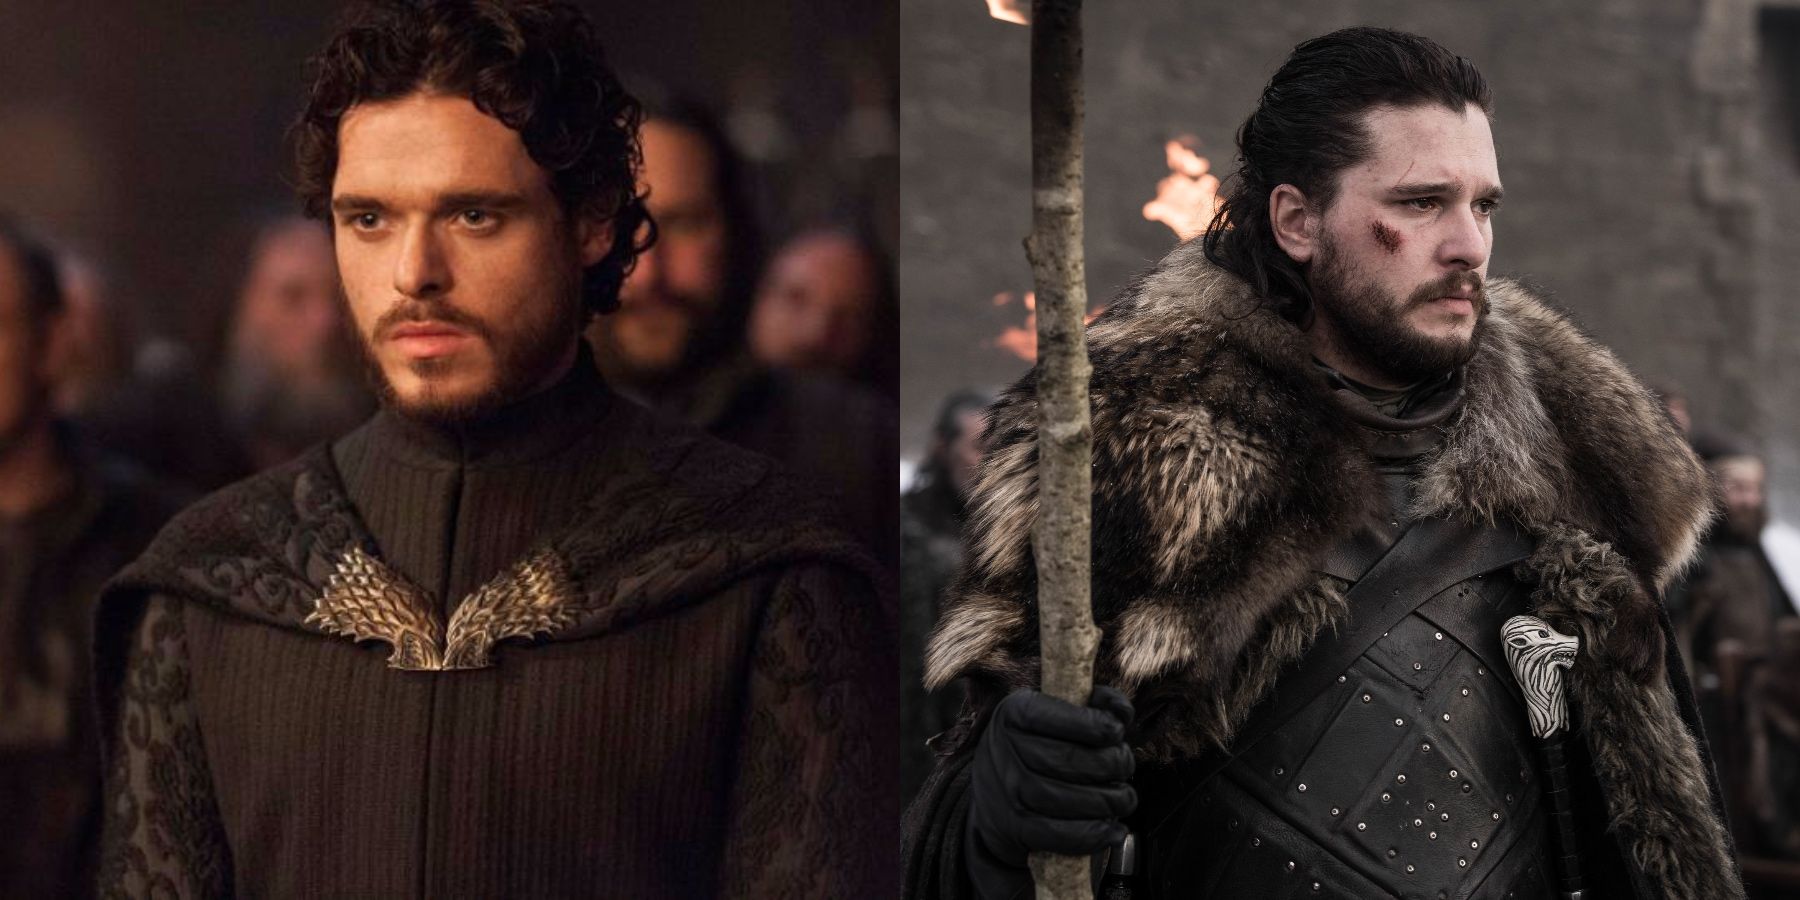 Robb Stark and Jon Snow in Game of Thrones.